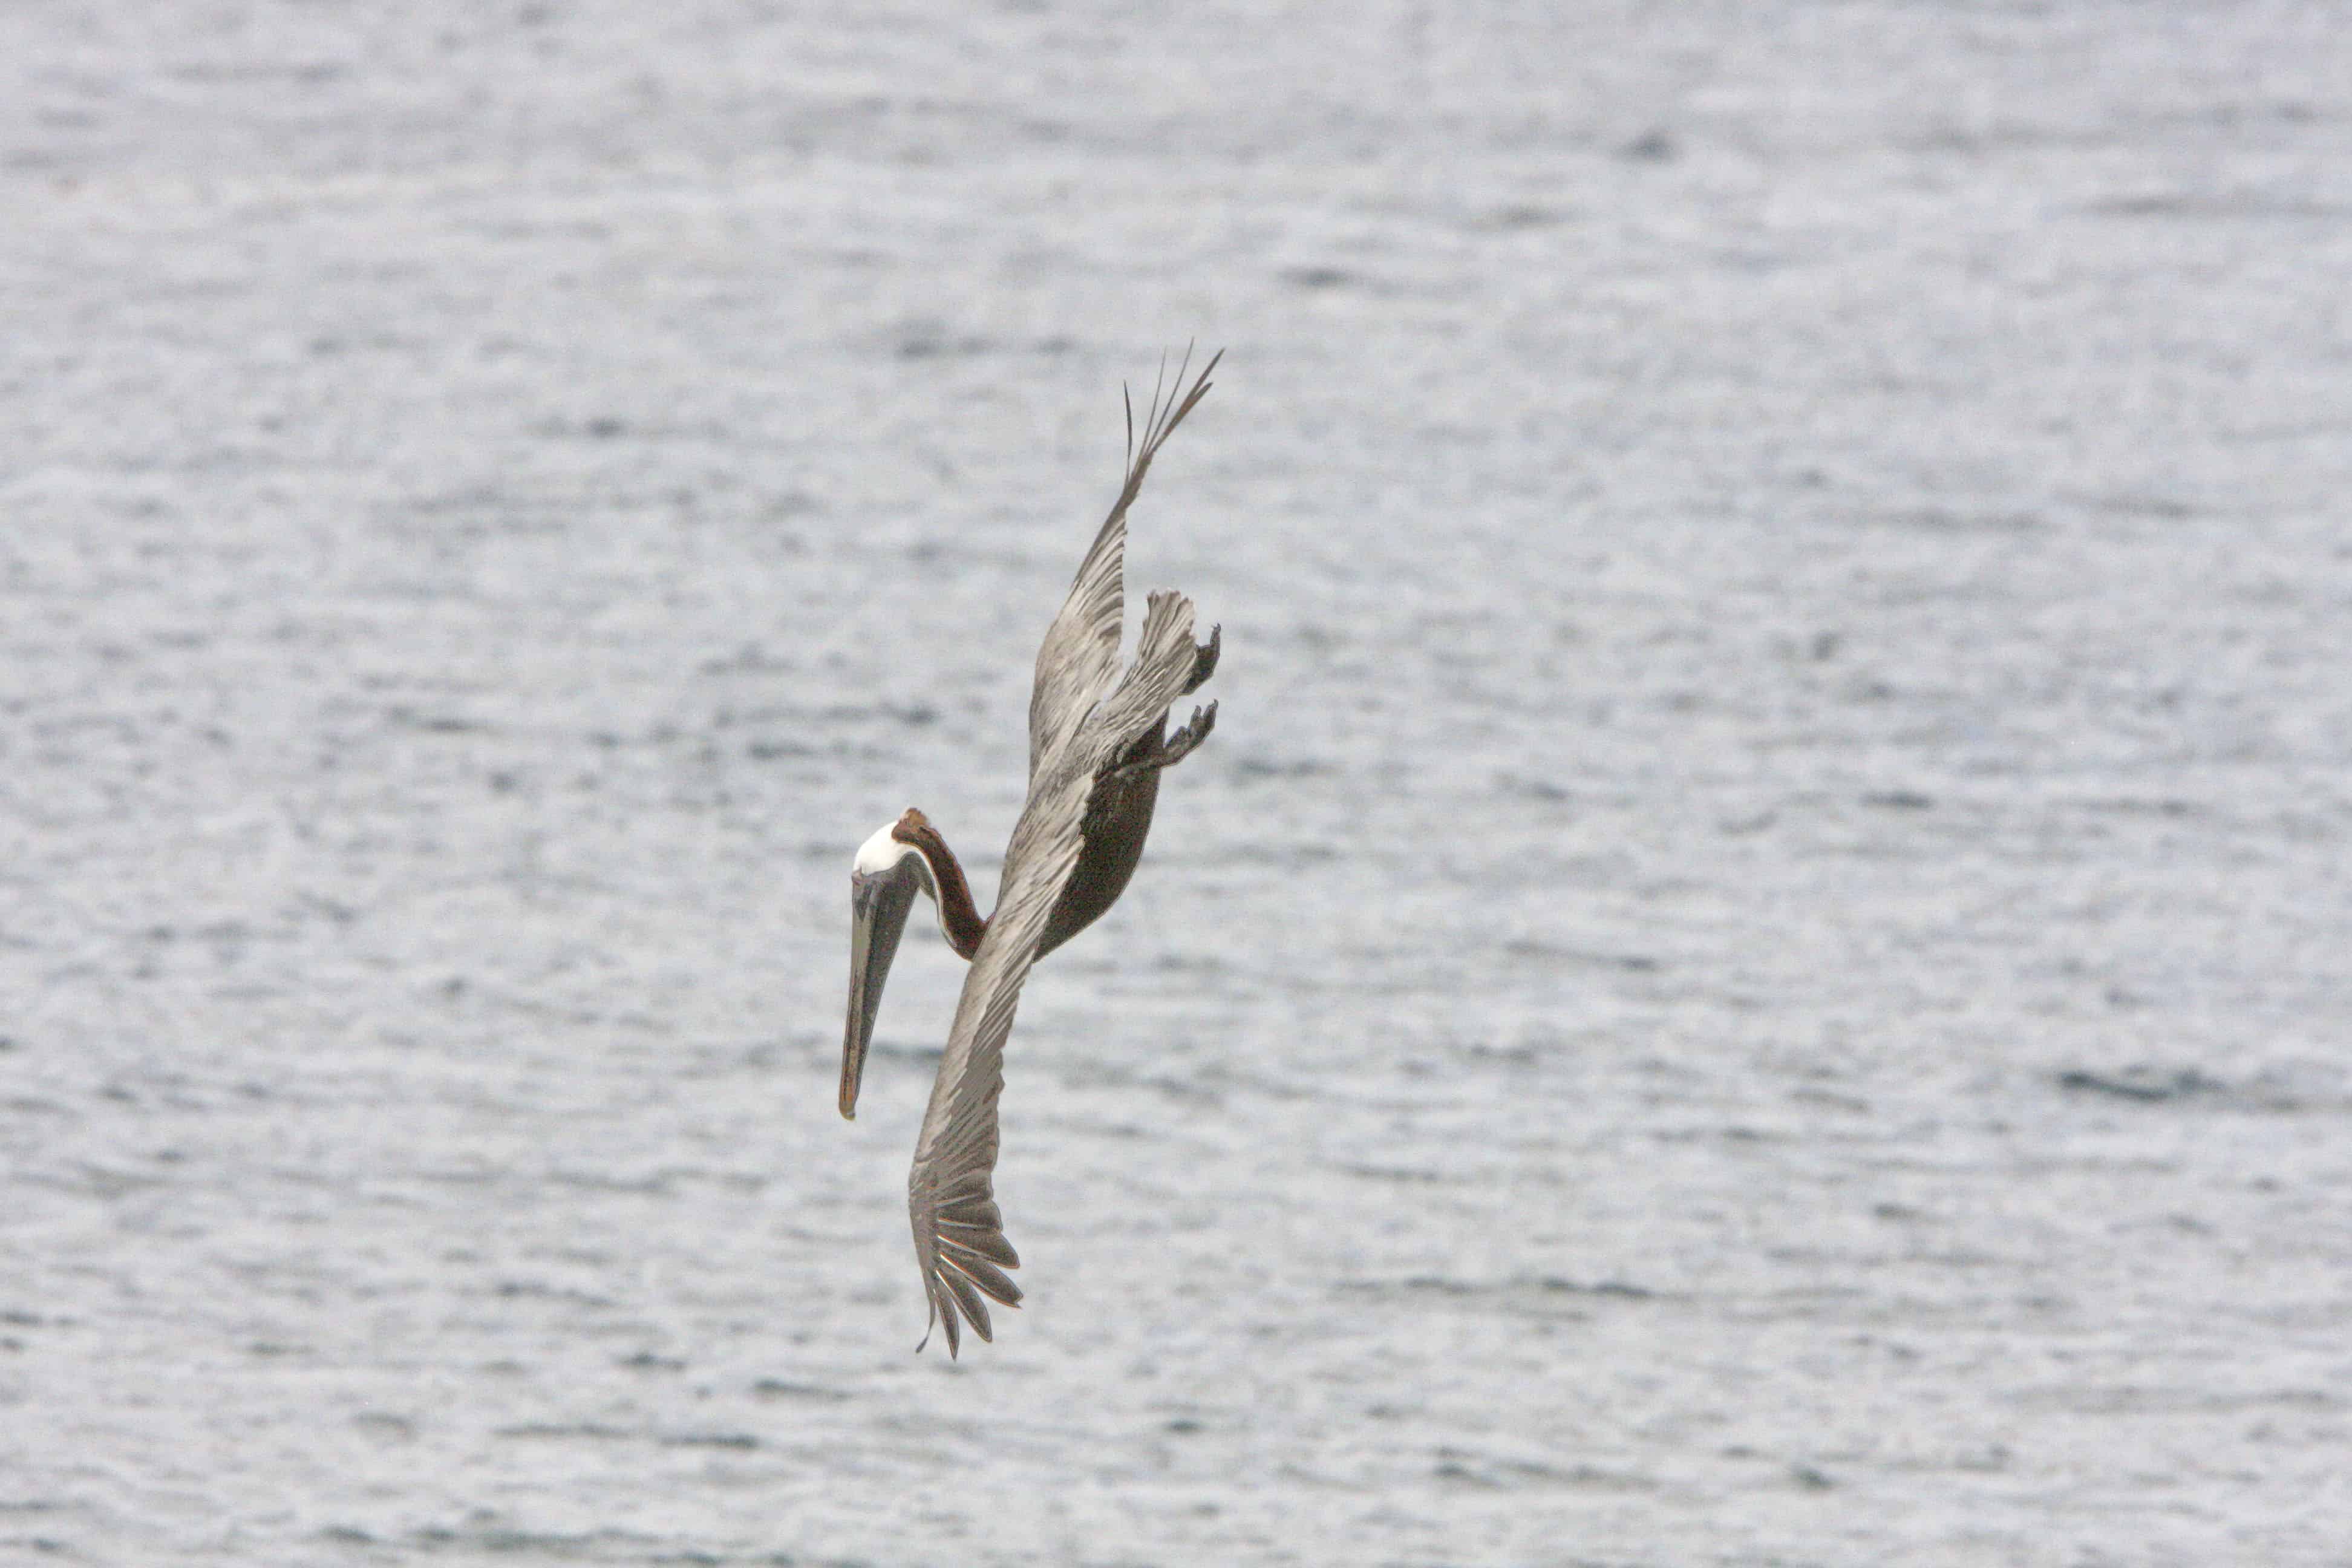 Brown pelican dives to catch one. Copyright: Dr Mike Pienkowski